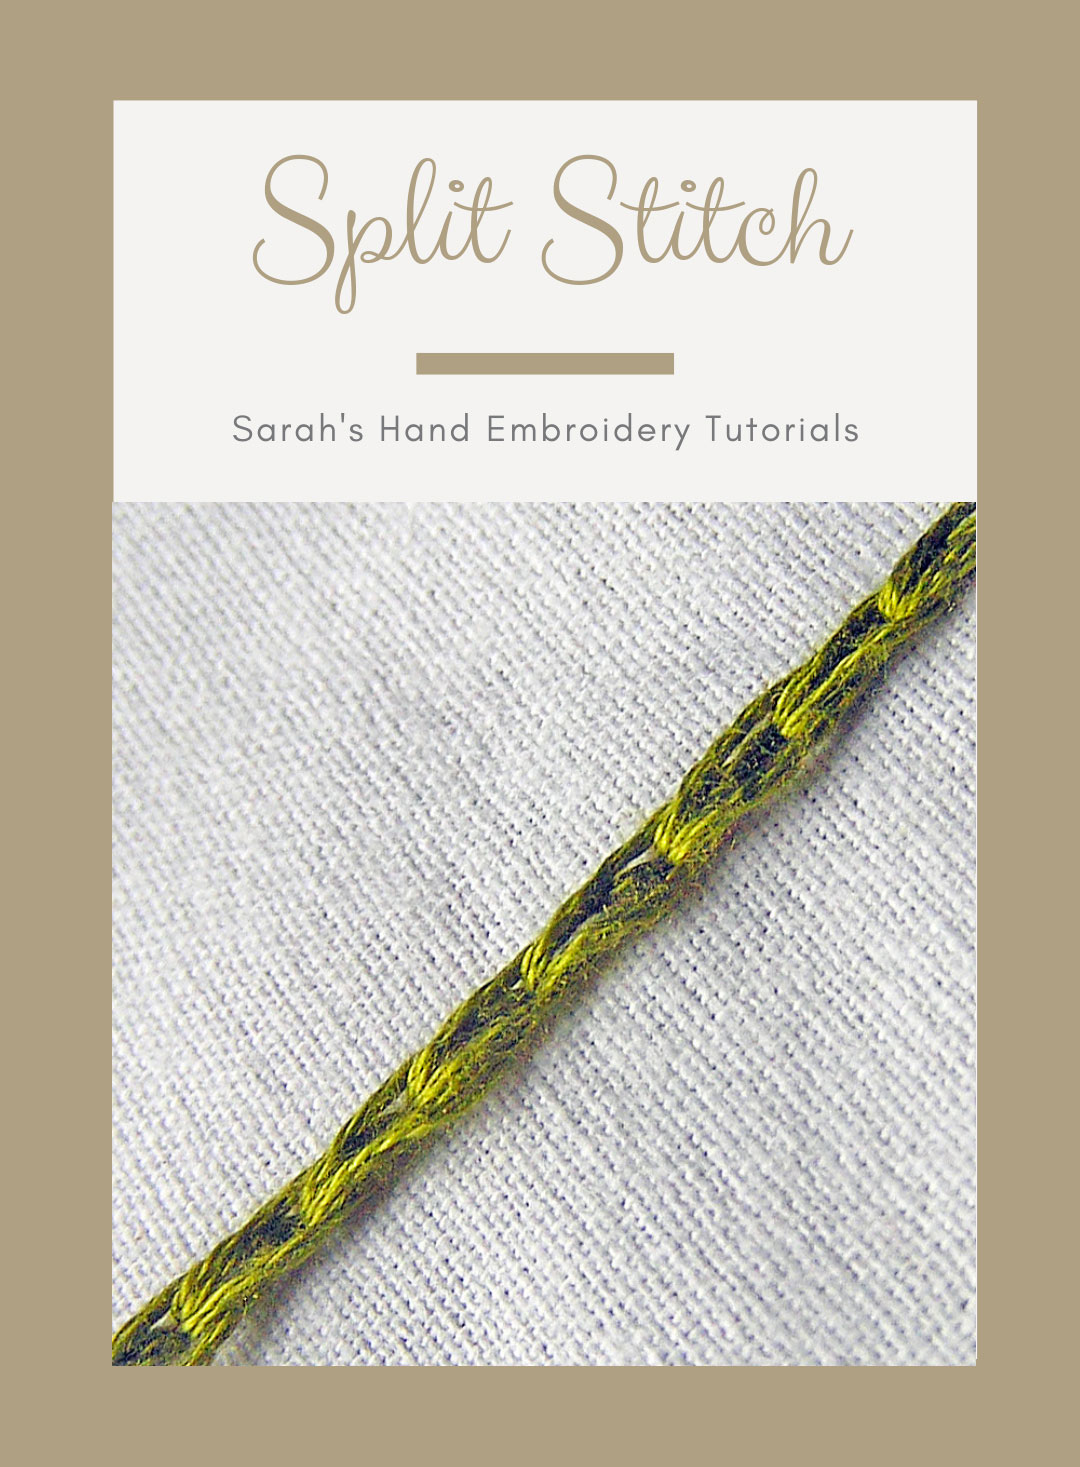 How to Sew by Hand: Seven Basic Stitches